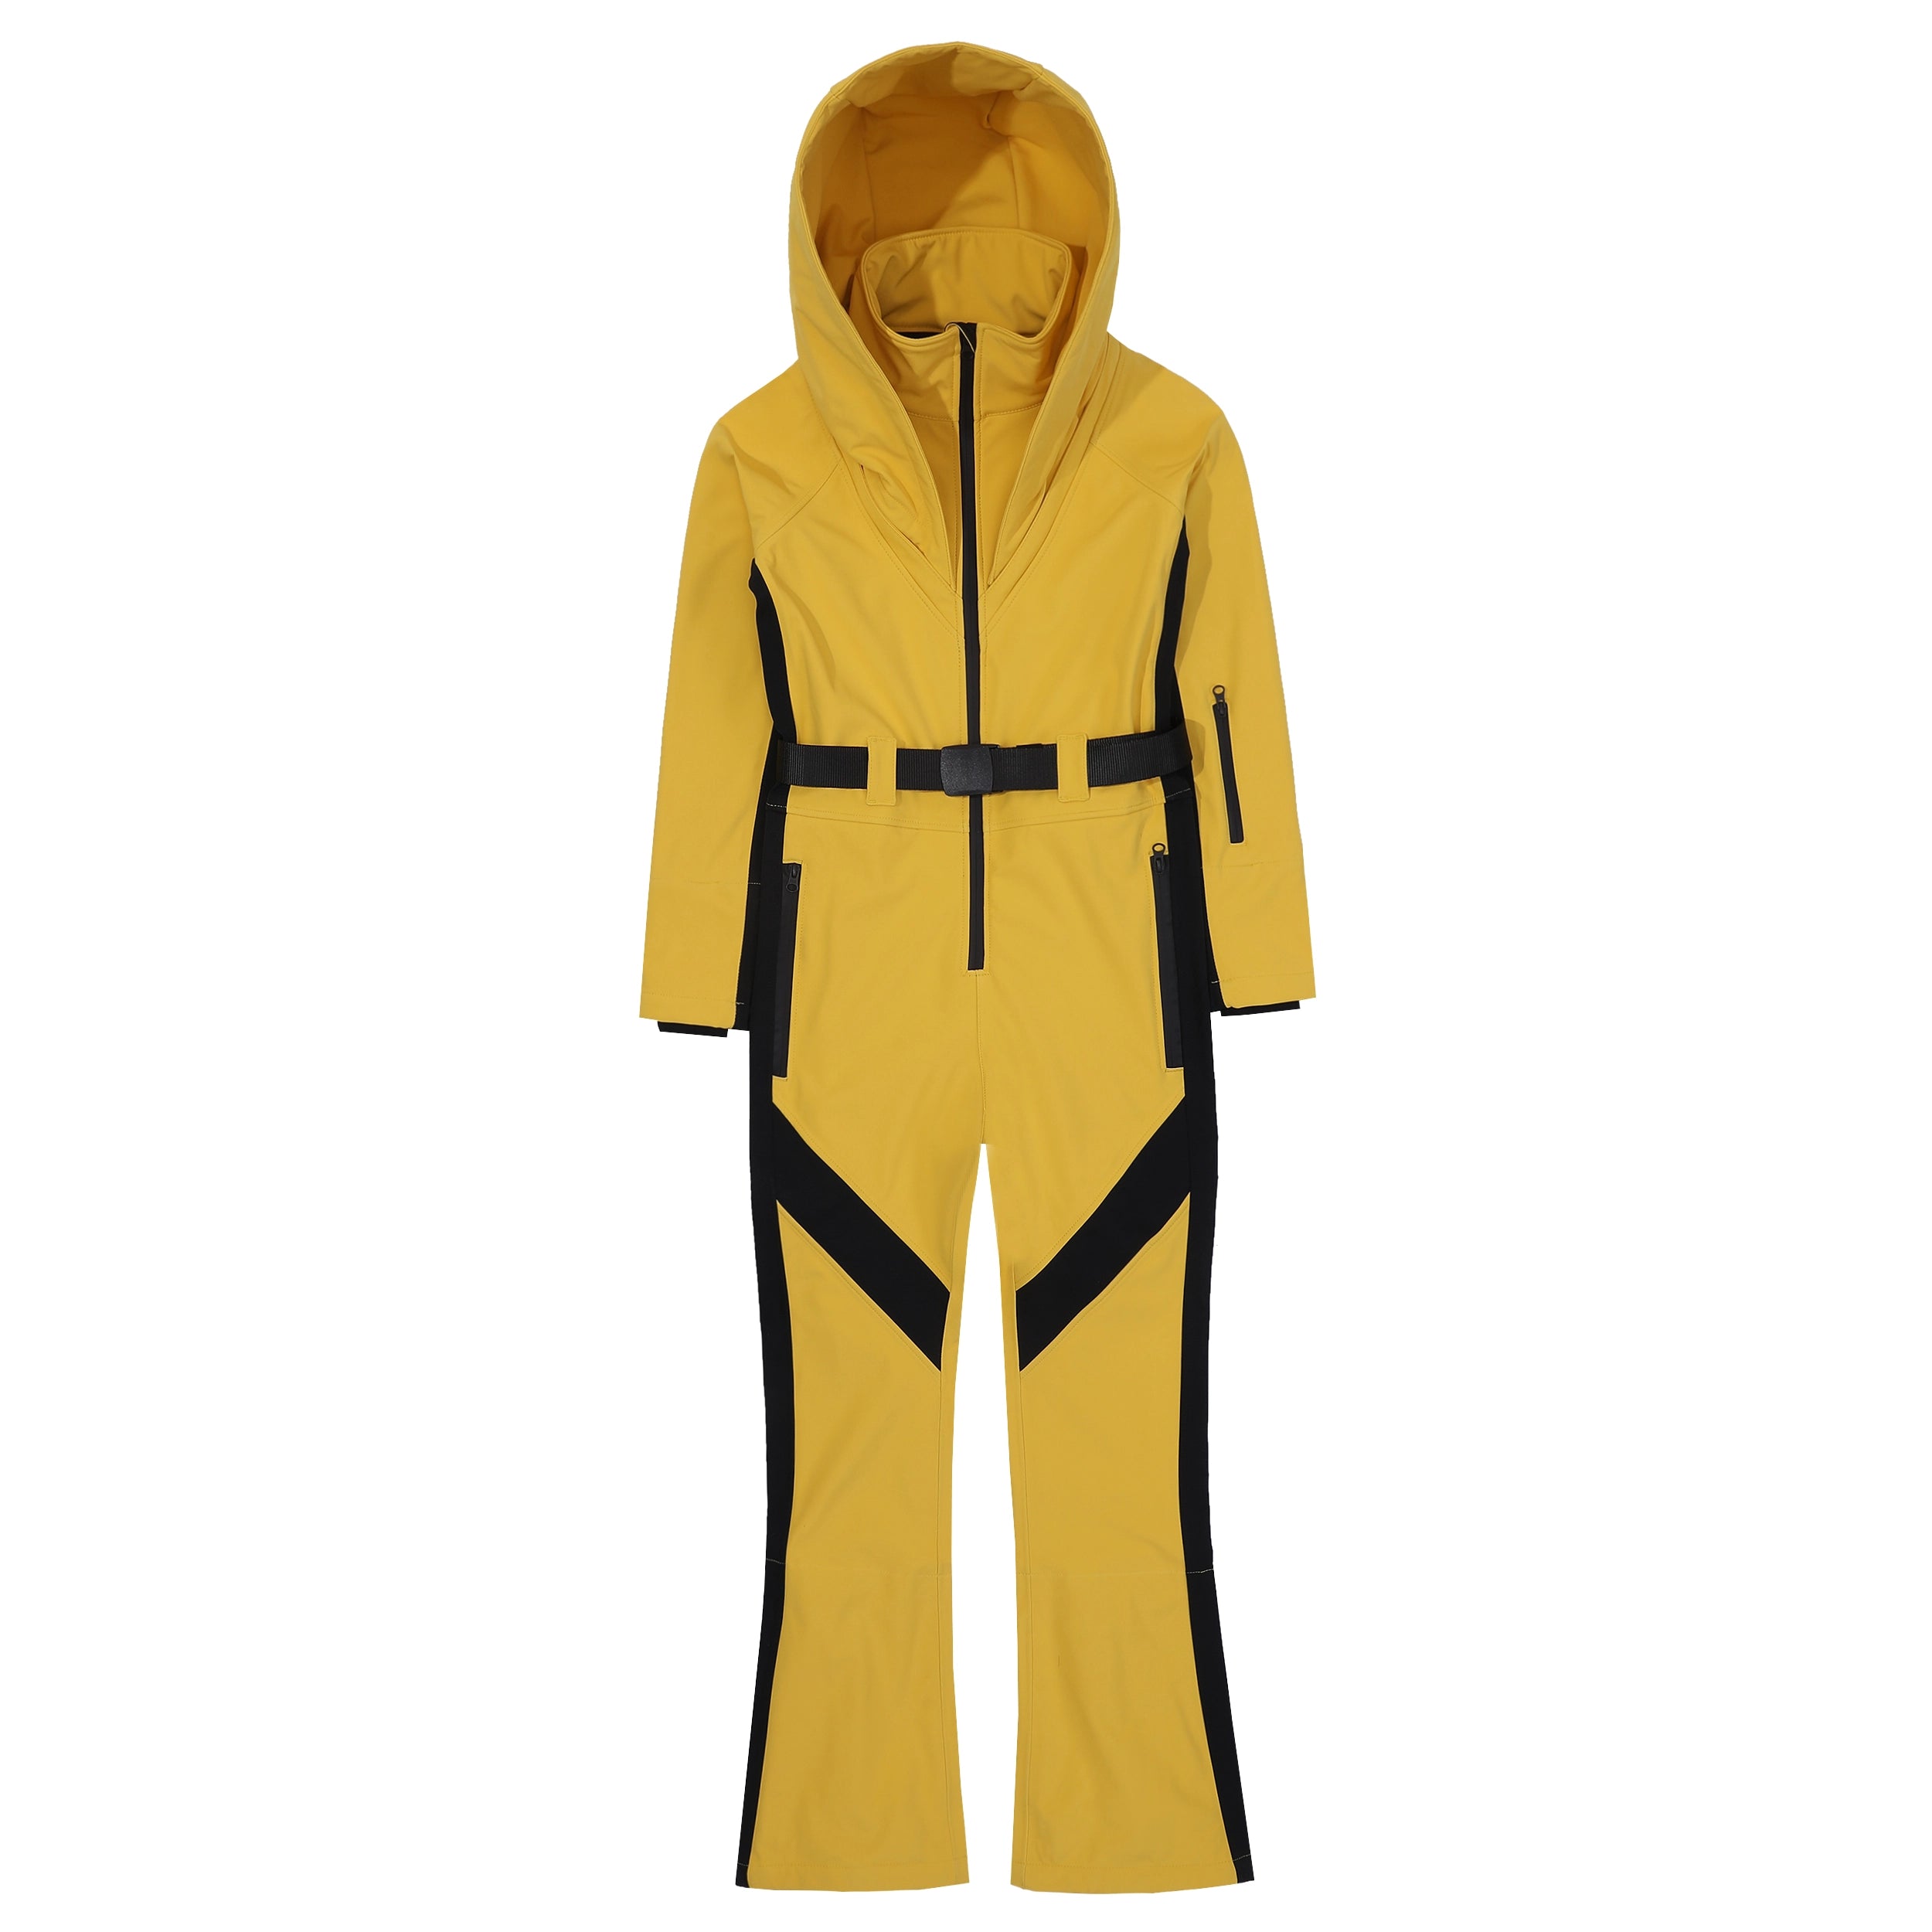 New DOOREK Jumpsuit for Women, Slim Fit and Slimming Effect, Single Board and Double Board Insulation, Waterproof Down Jacket with Belt as a Gift